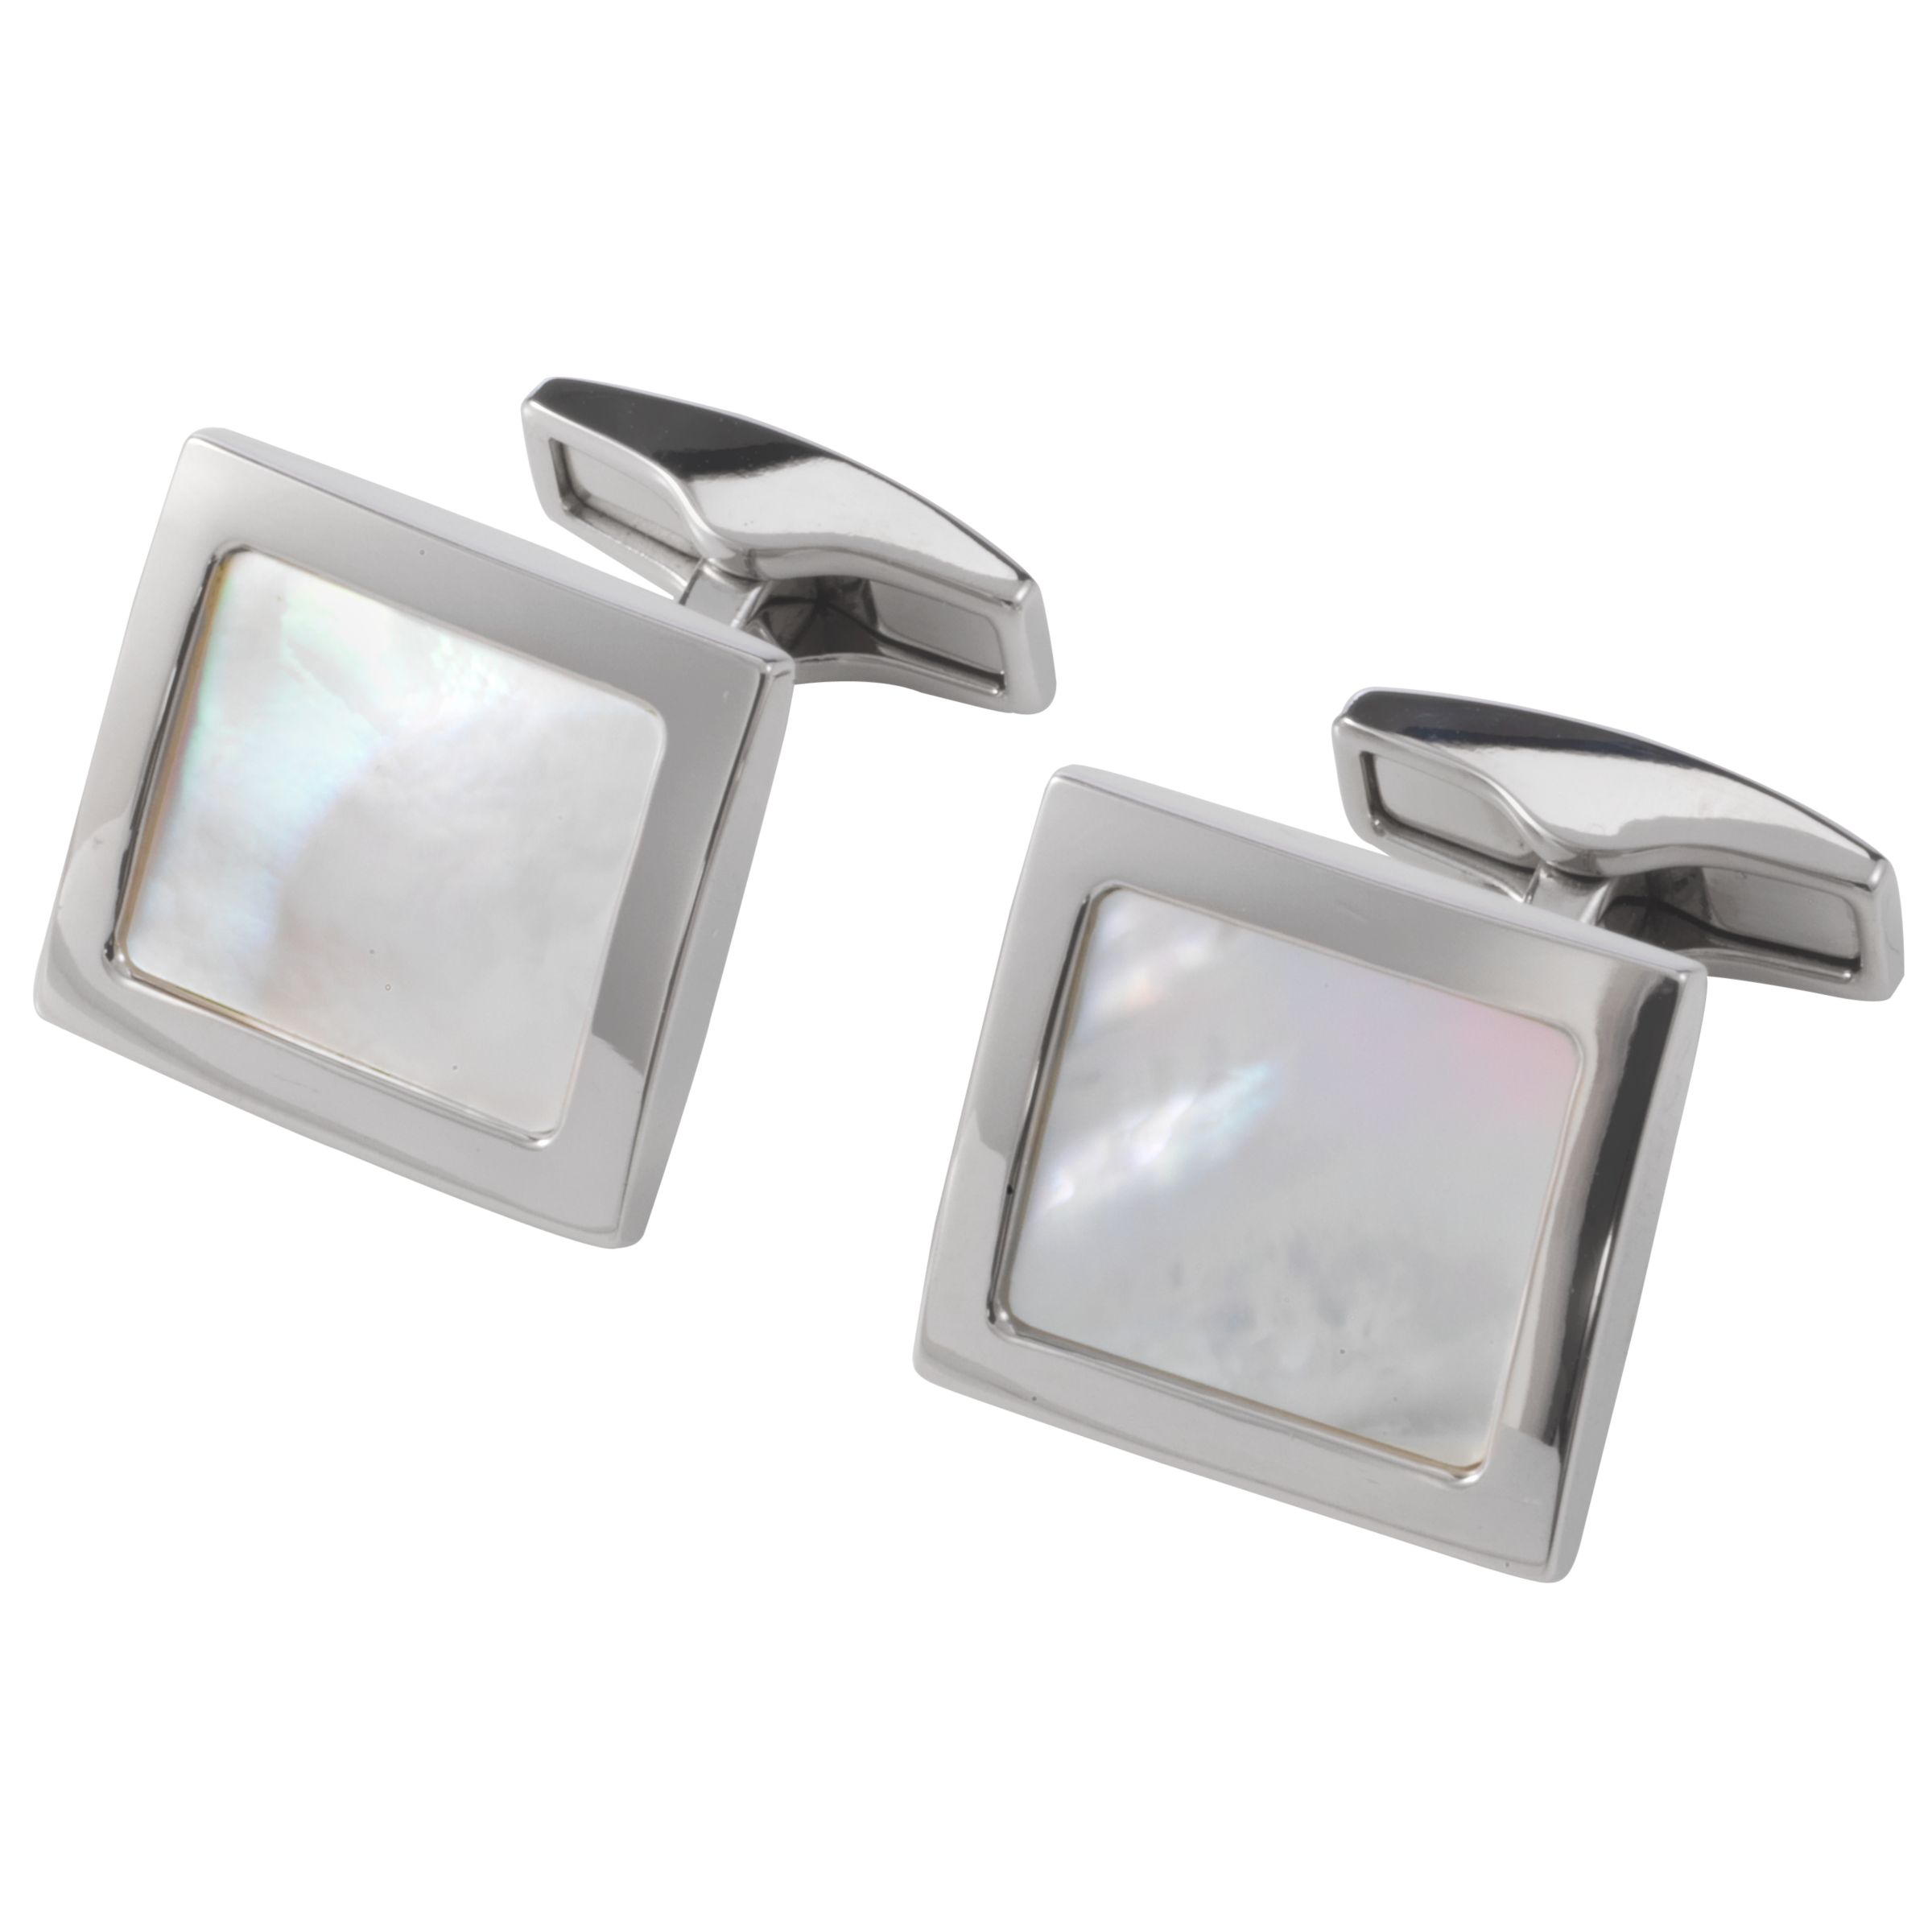 Hugo Boss Square Mother of Pearl Cufflinks, White